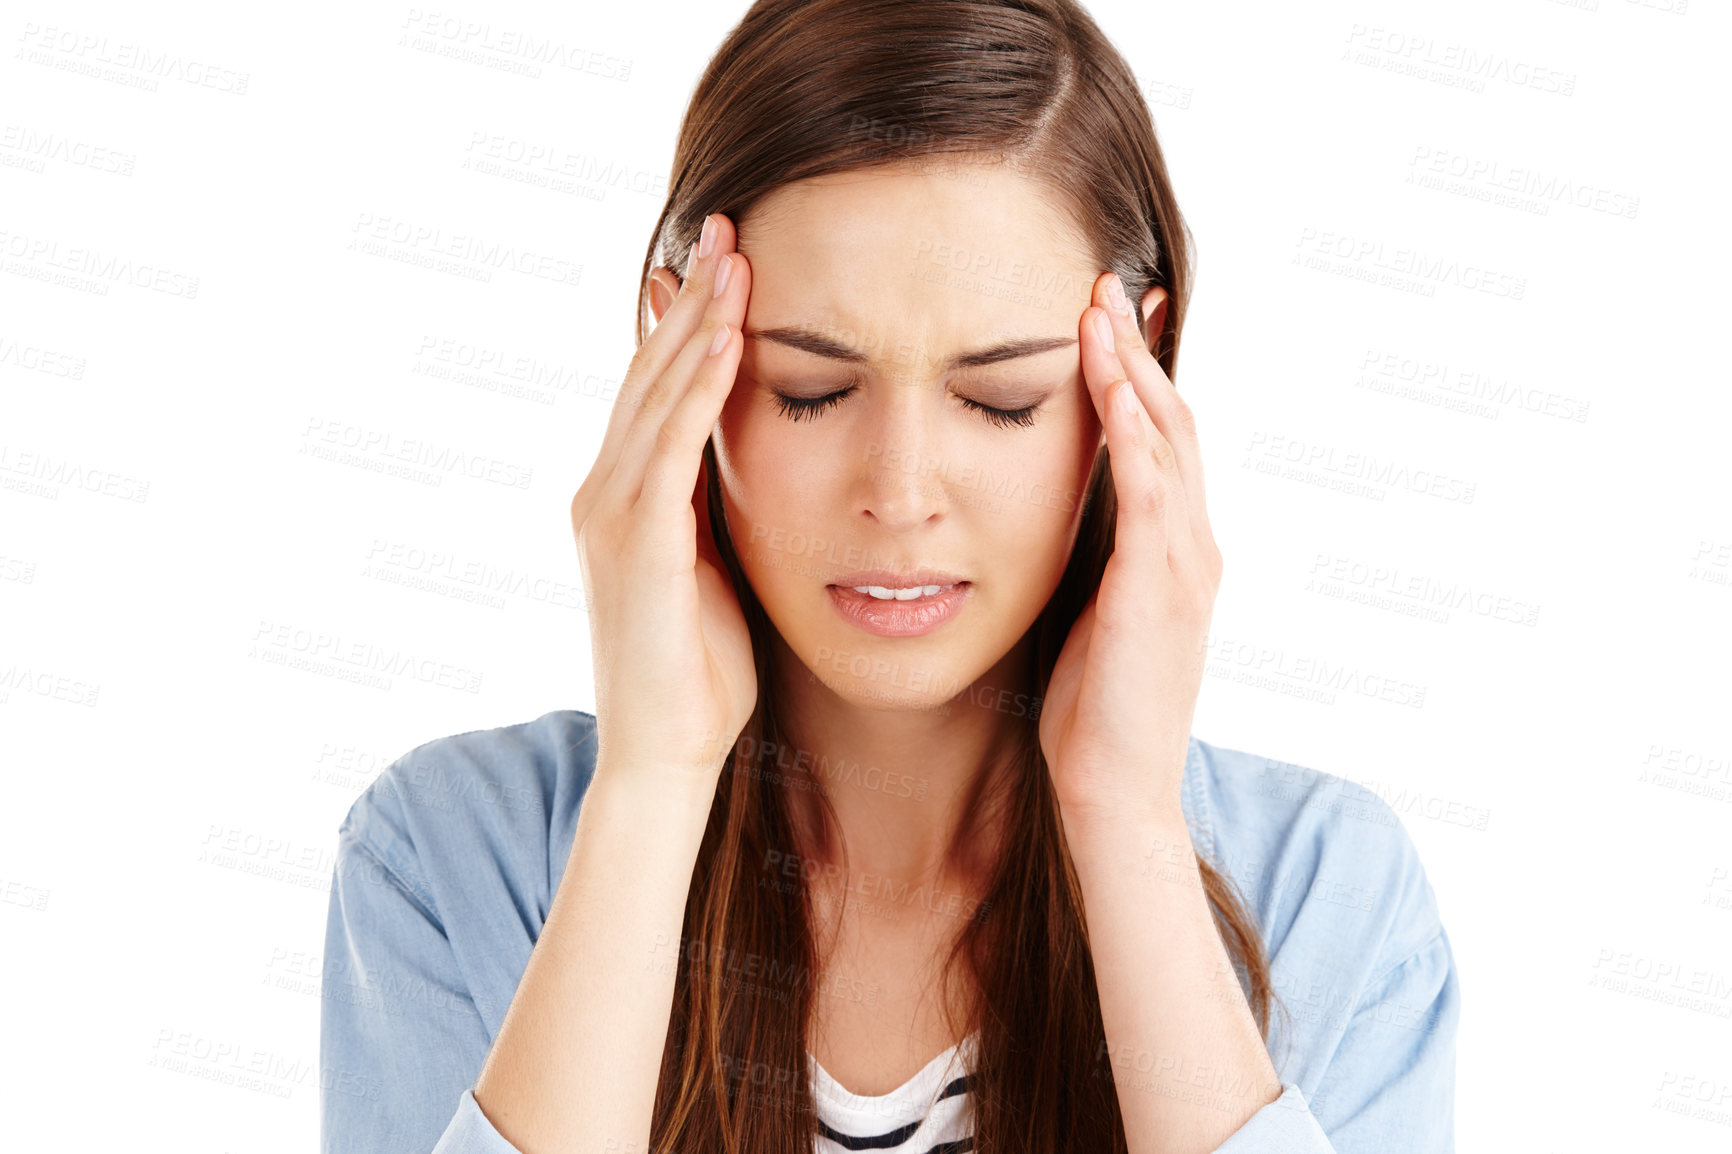 Buy stock photo Studio shot of an attractive young woman suffering from a headache against a white background